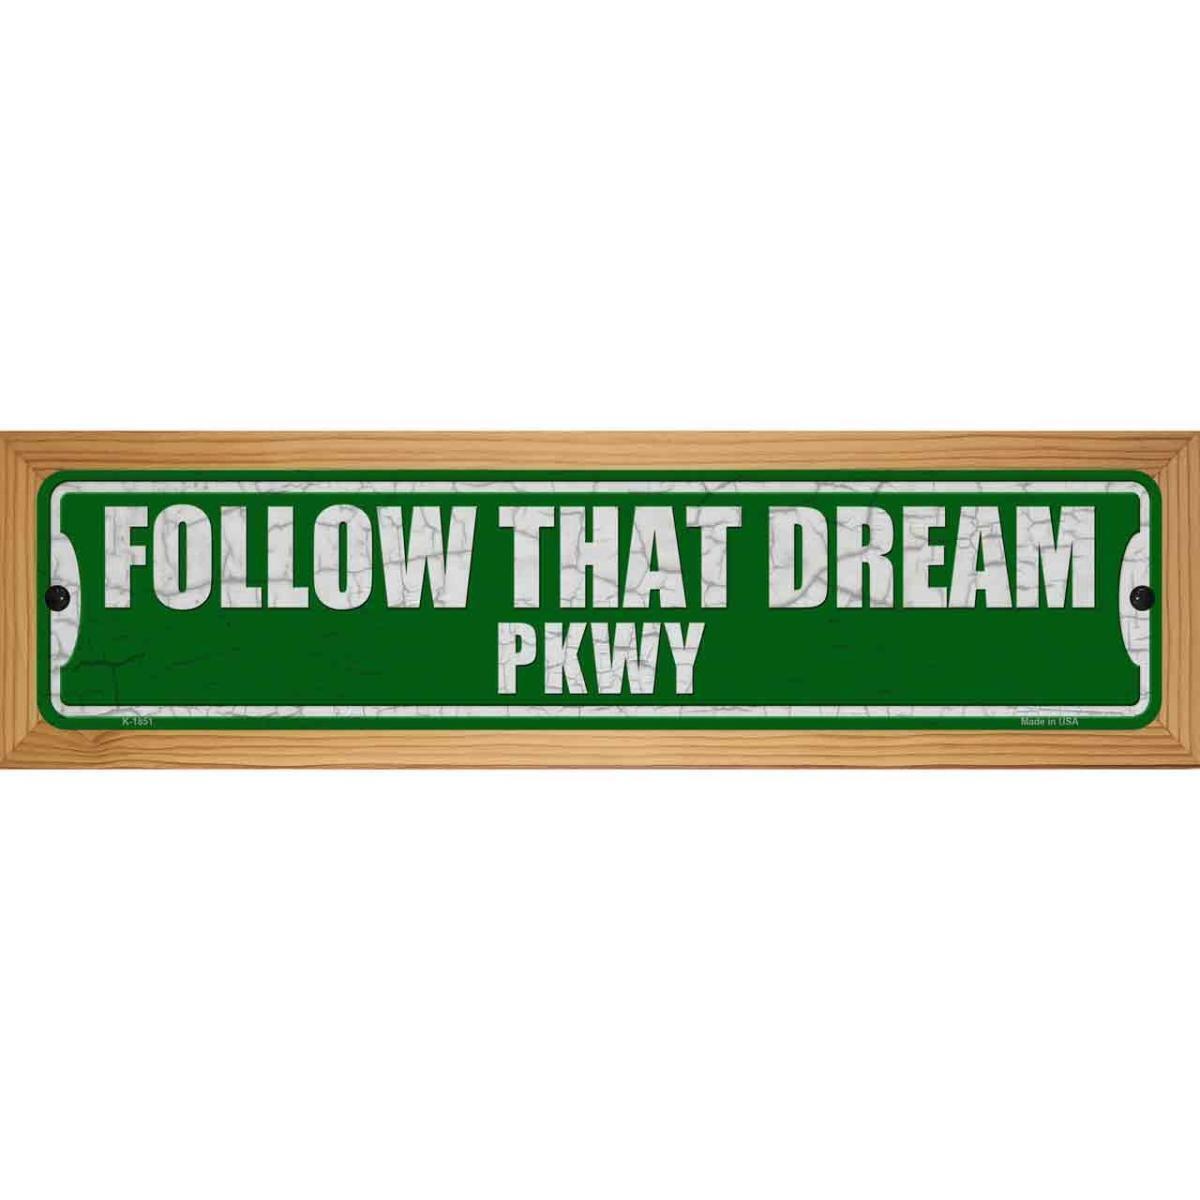 Smart Blonde WB-K-1851 4 x 18 in. Follow That Dream Pkwy Novelty Wood Mounted Small Metal Street Sign